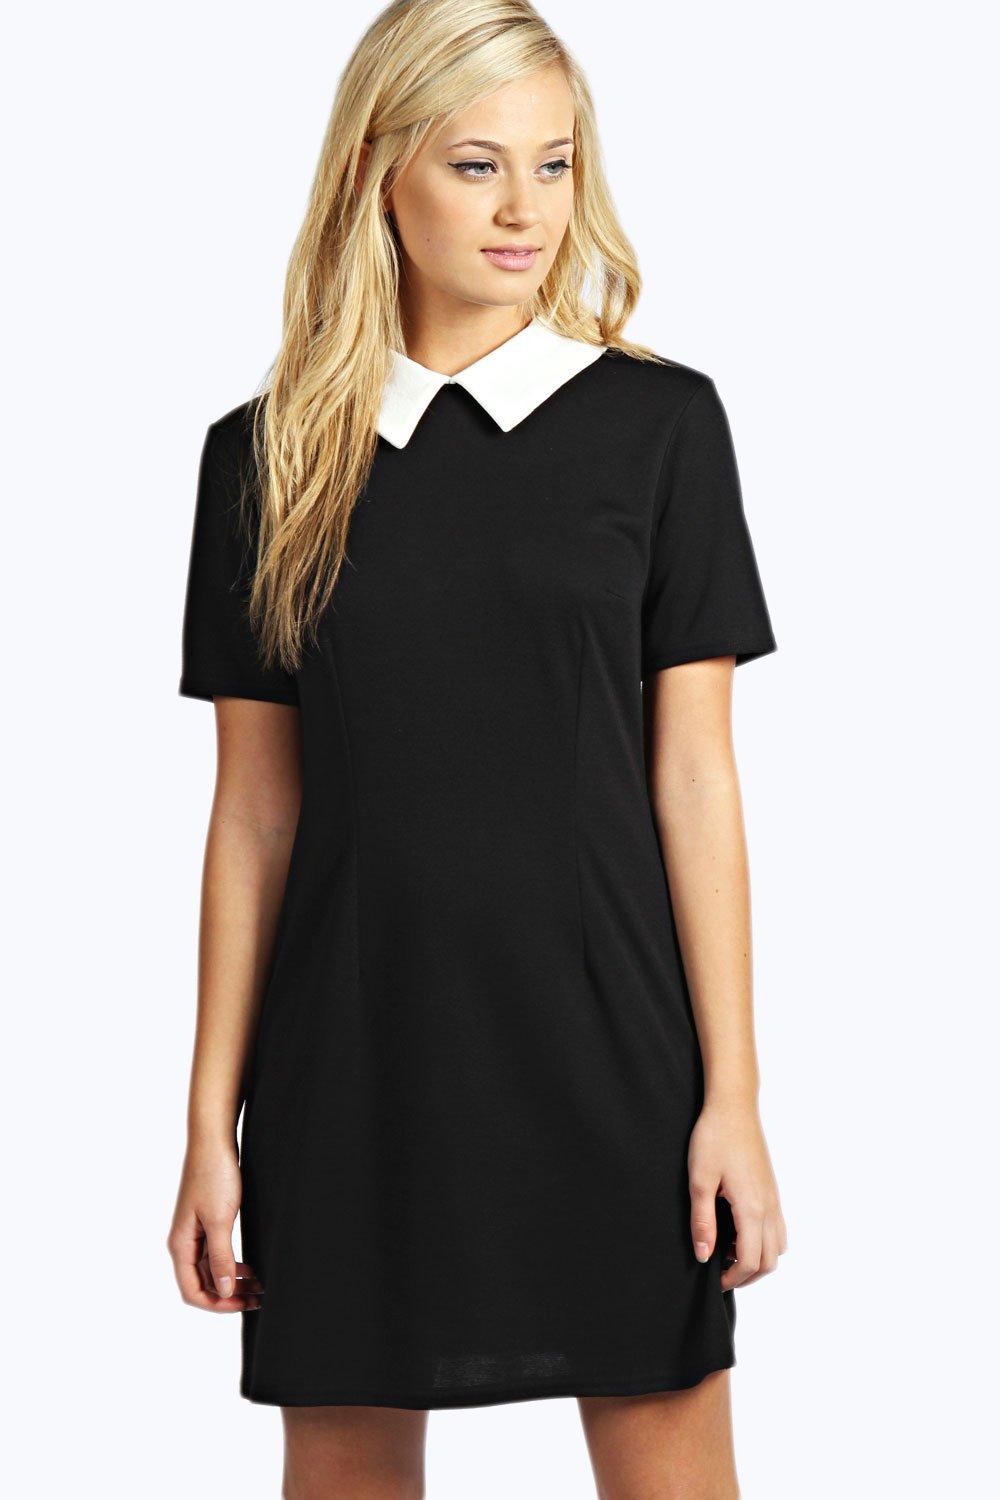 dress with collar and sleeves